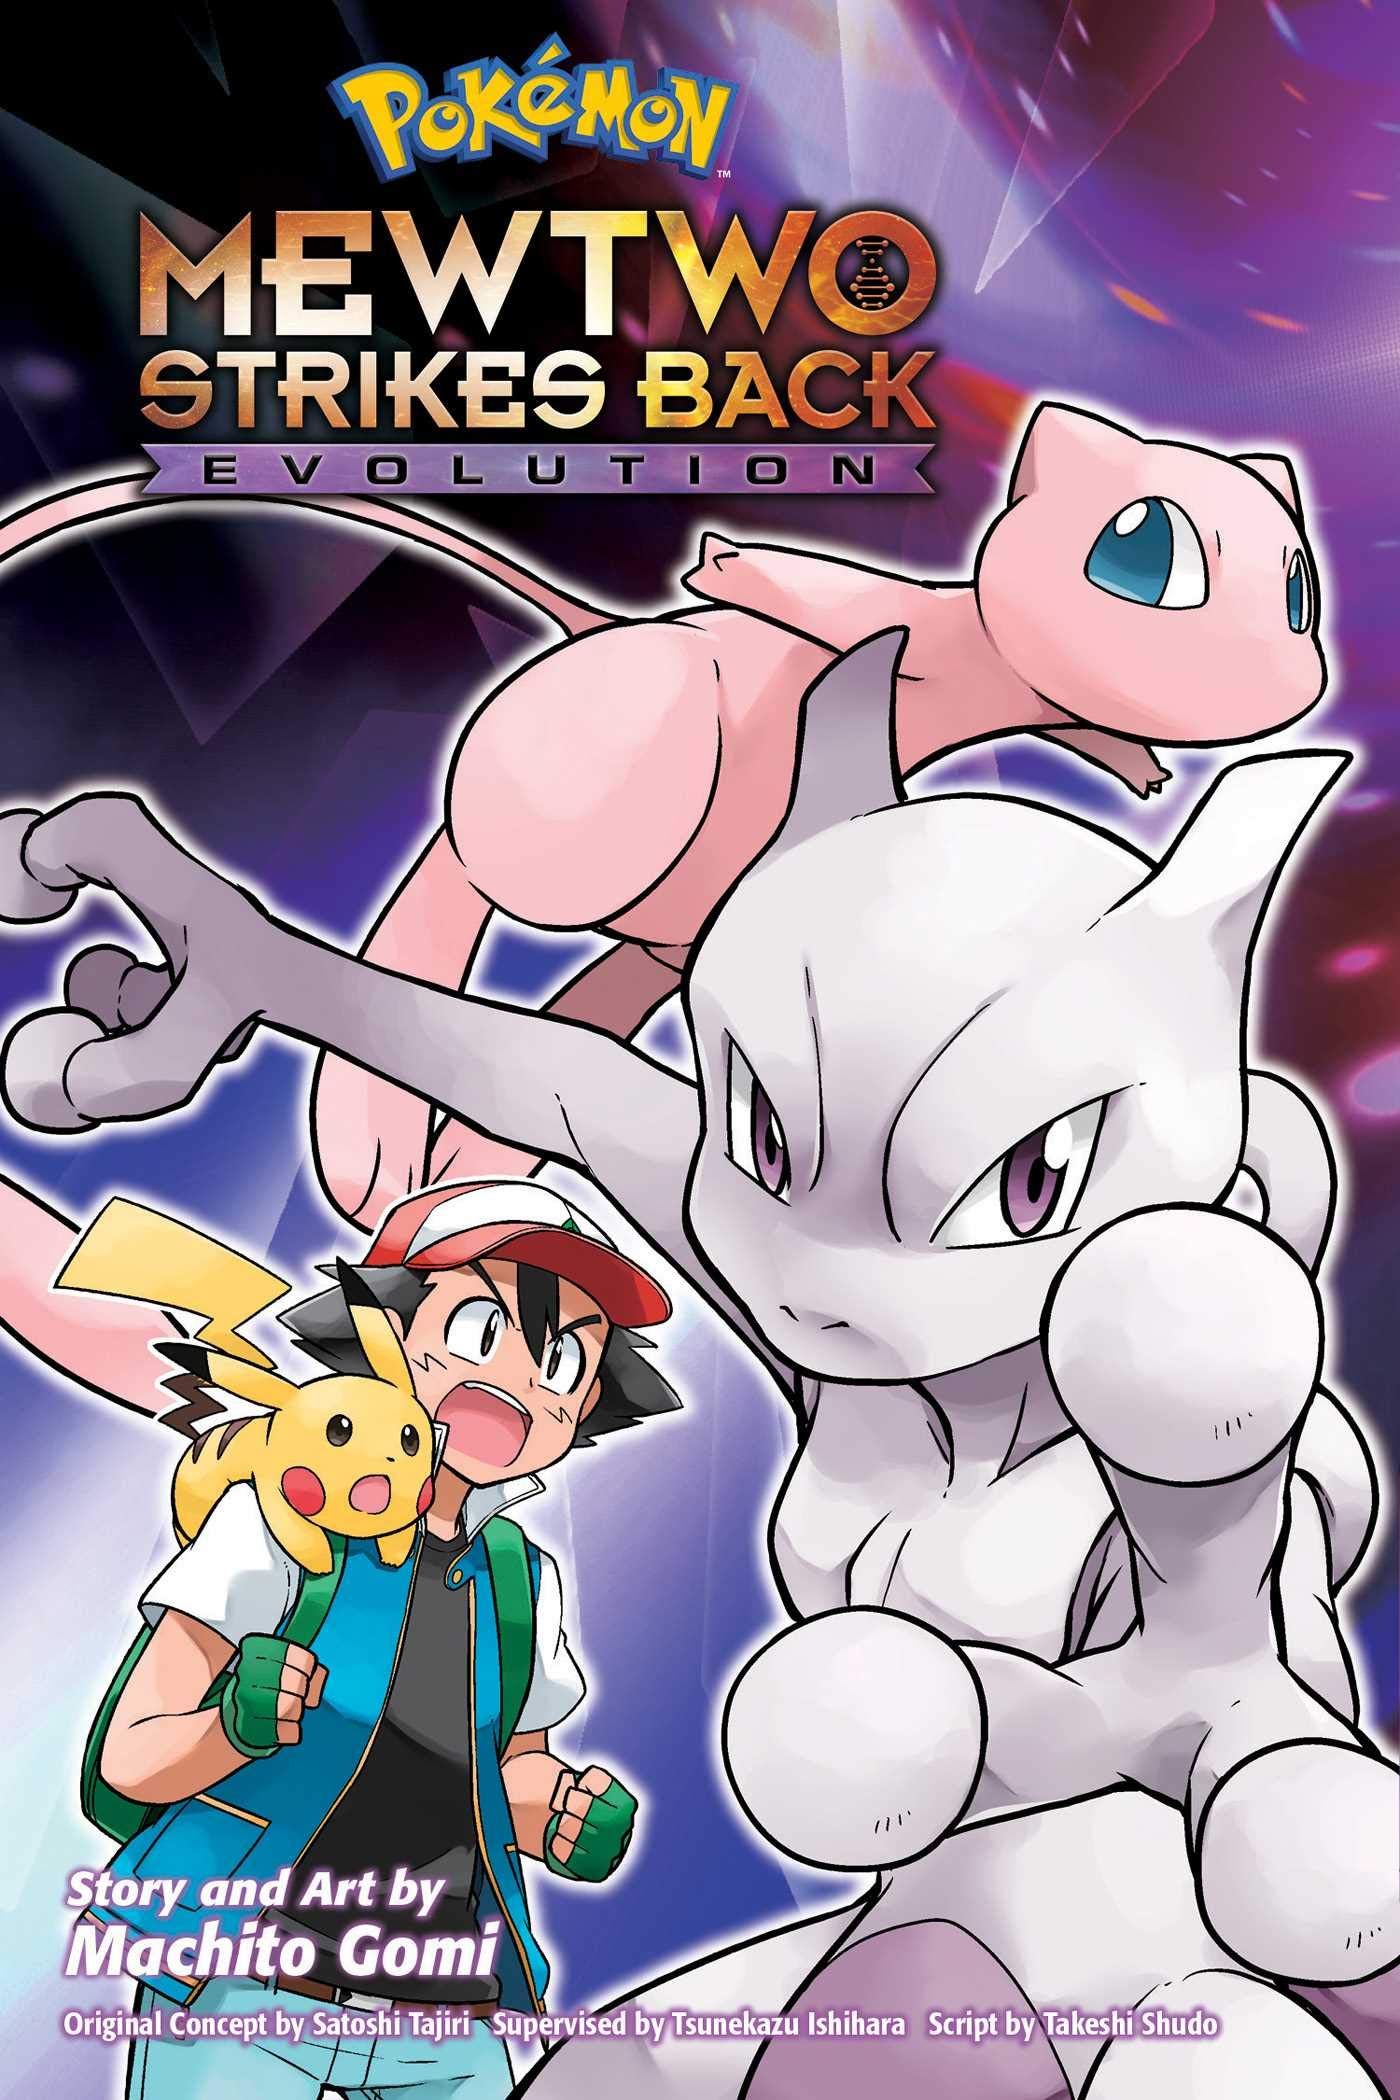 Pokémon Mewtwo Strikes Back  Evolution Will Appeal to Completionists Only